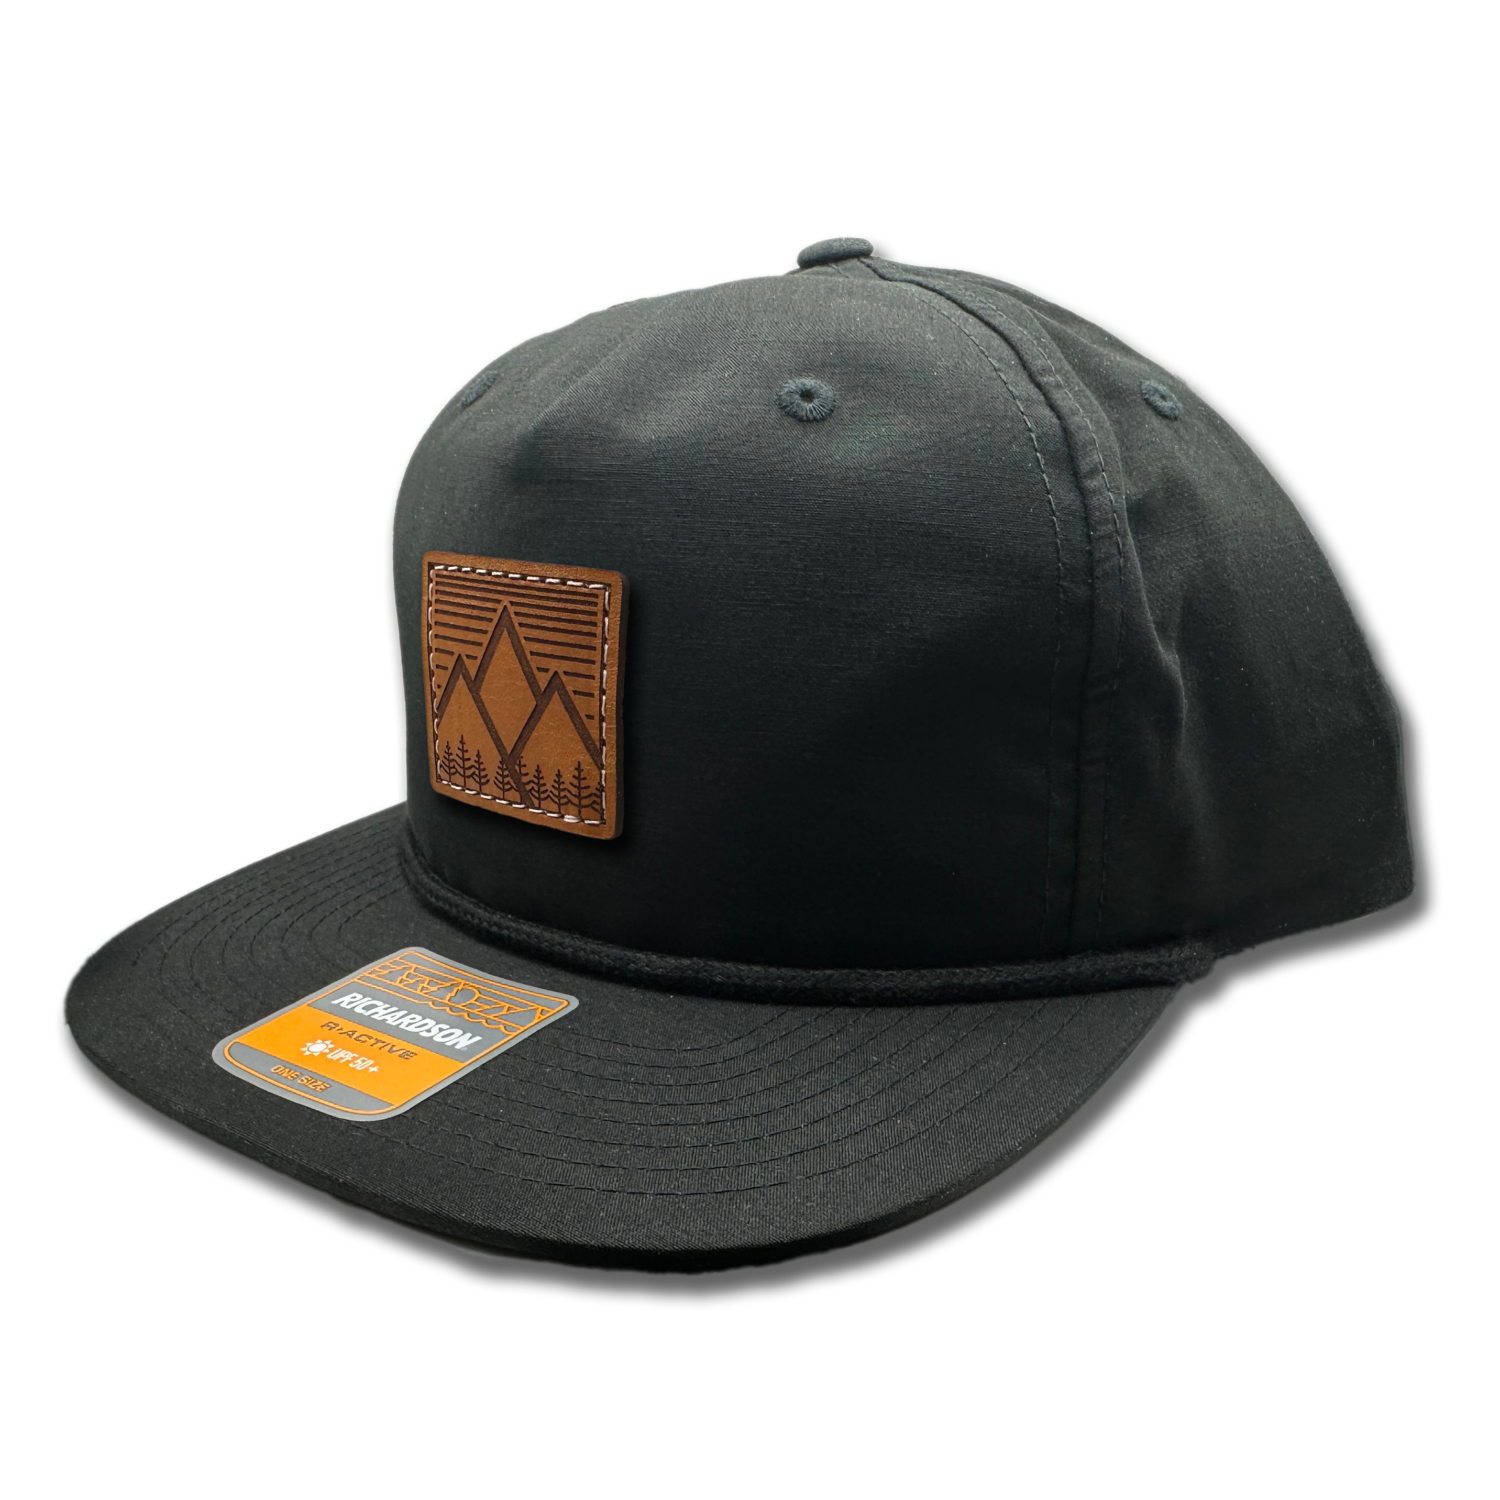 Black Richardson 256 Rope Umpqua Hat: flatbill, lightweight material, low profile SnapBack cap ideal for outdoor adventures. Real leather patch with mountain west design adds rugged charm.